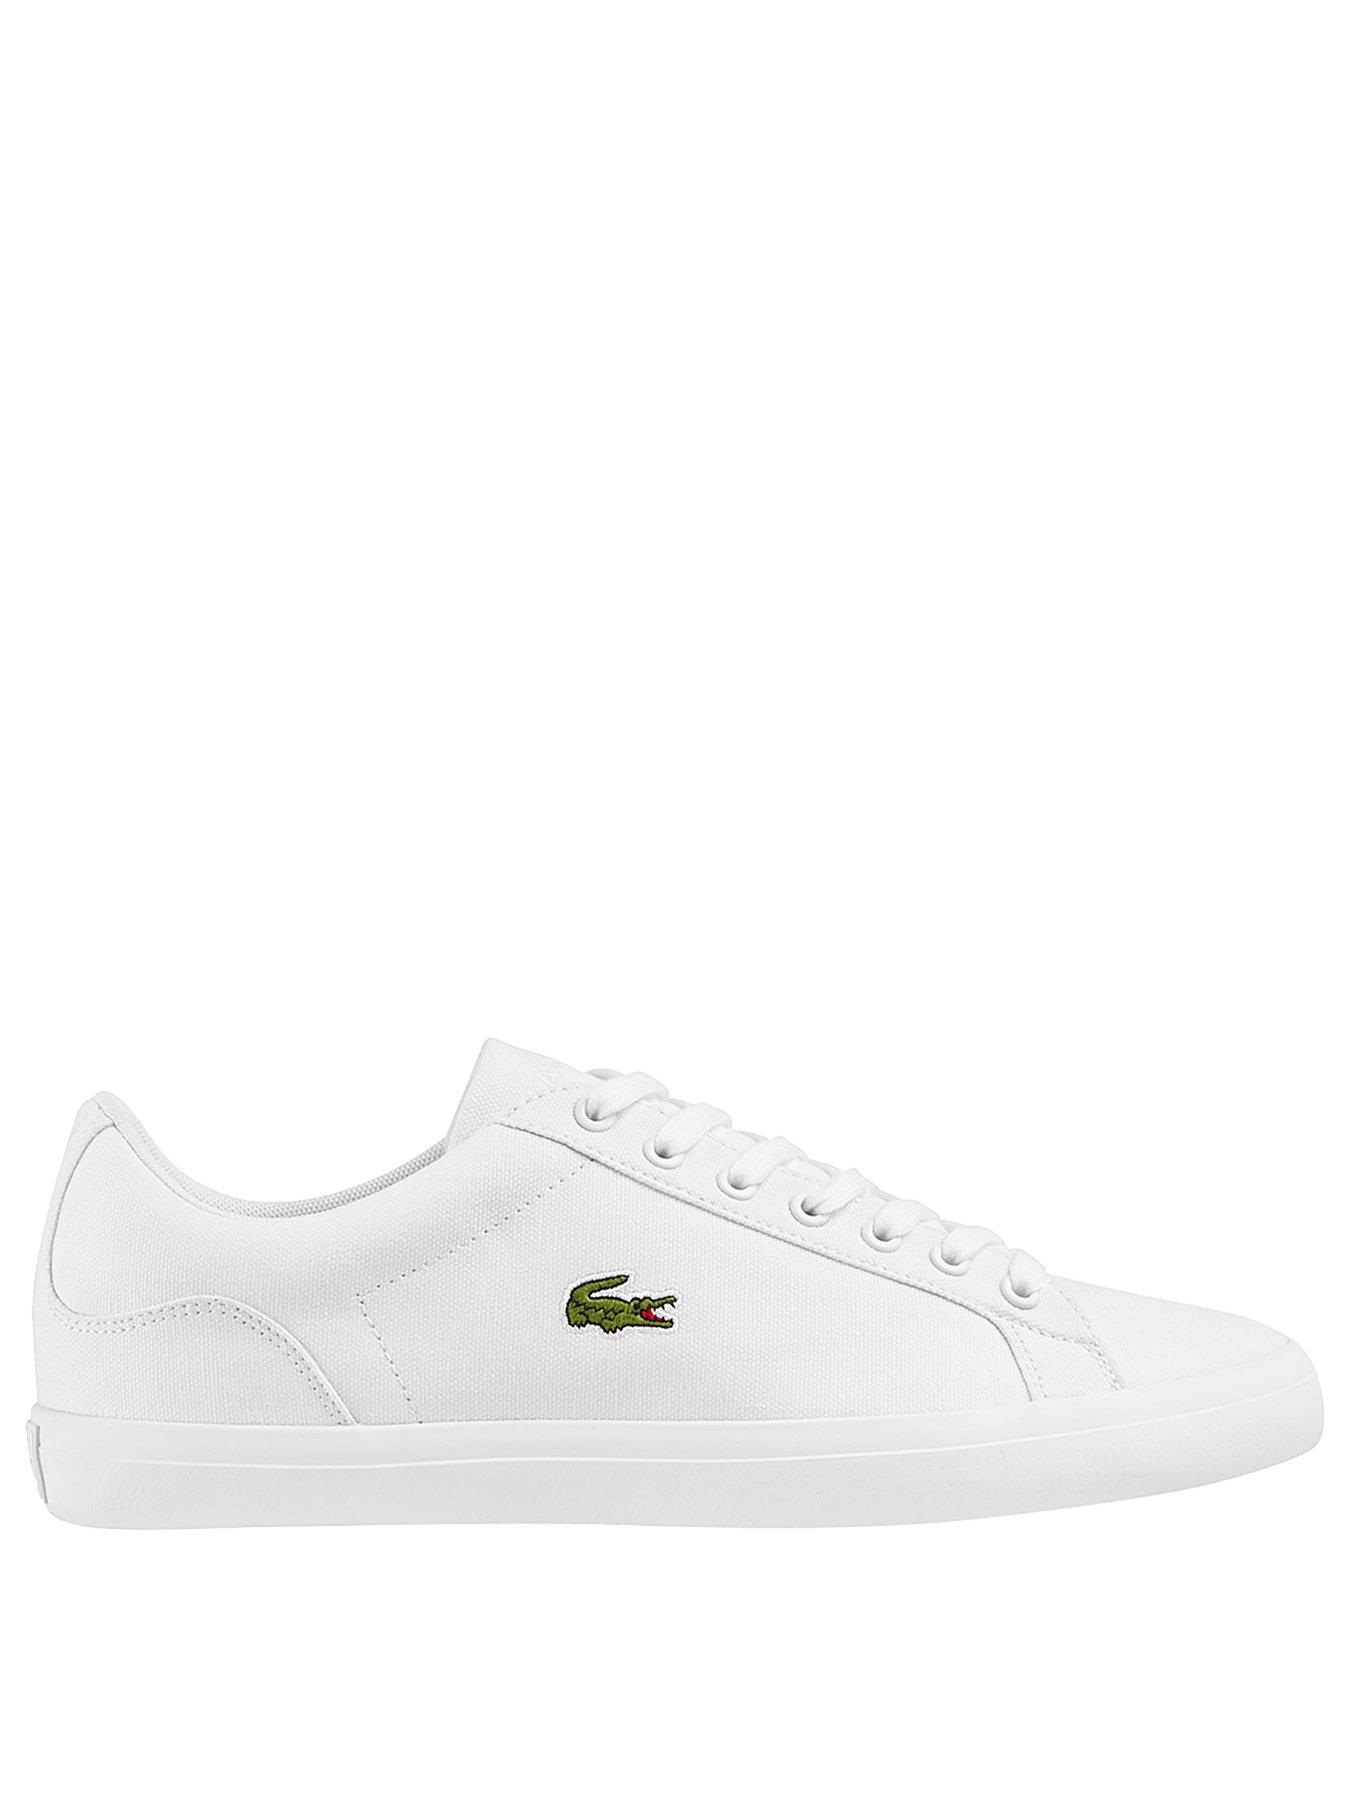 Lacoste Lerond Canvas Trainers - White 